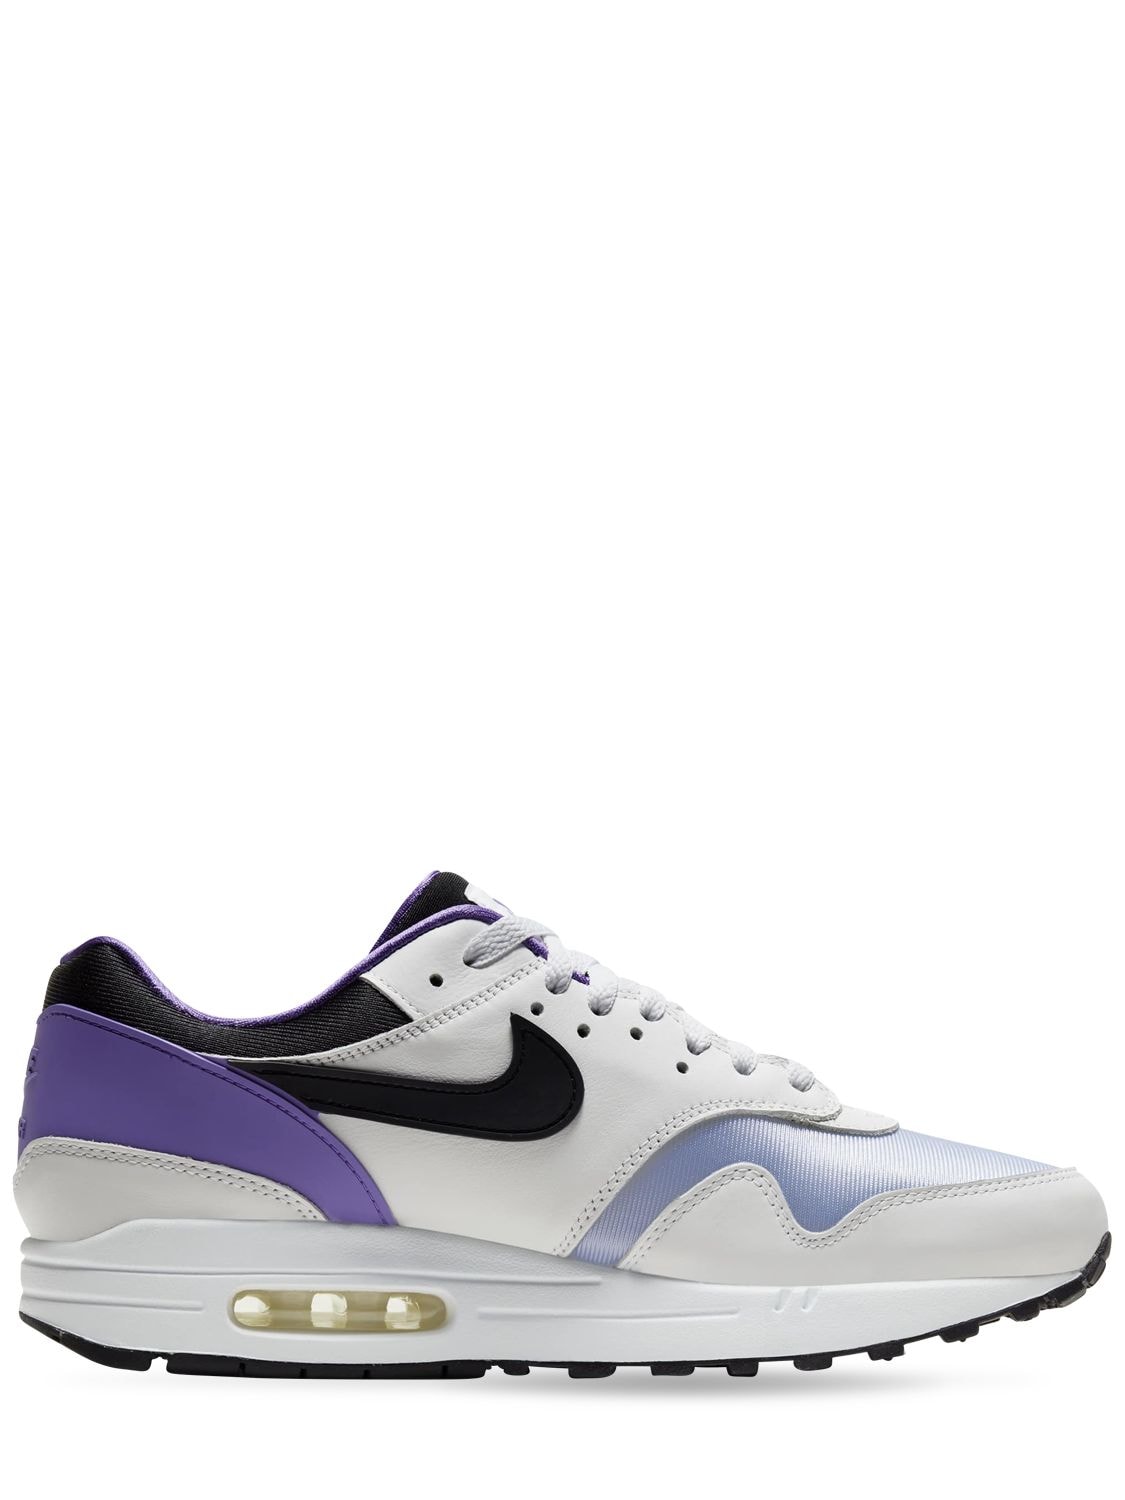 Nike Air Max 1 Dna In White,purple Punch